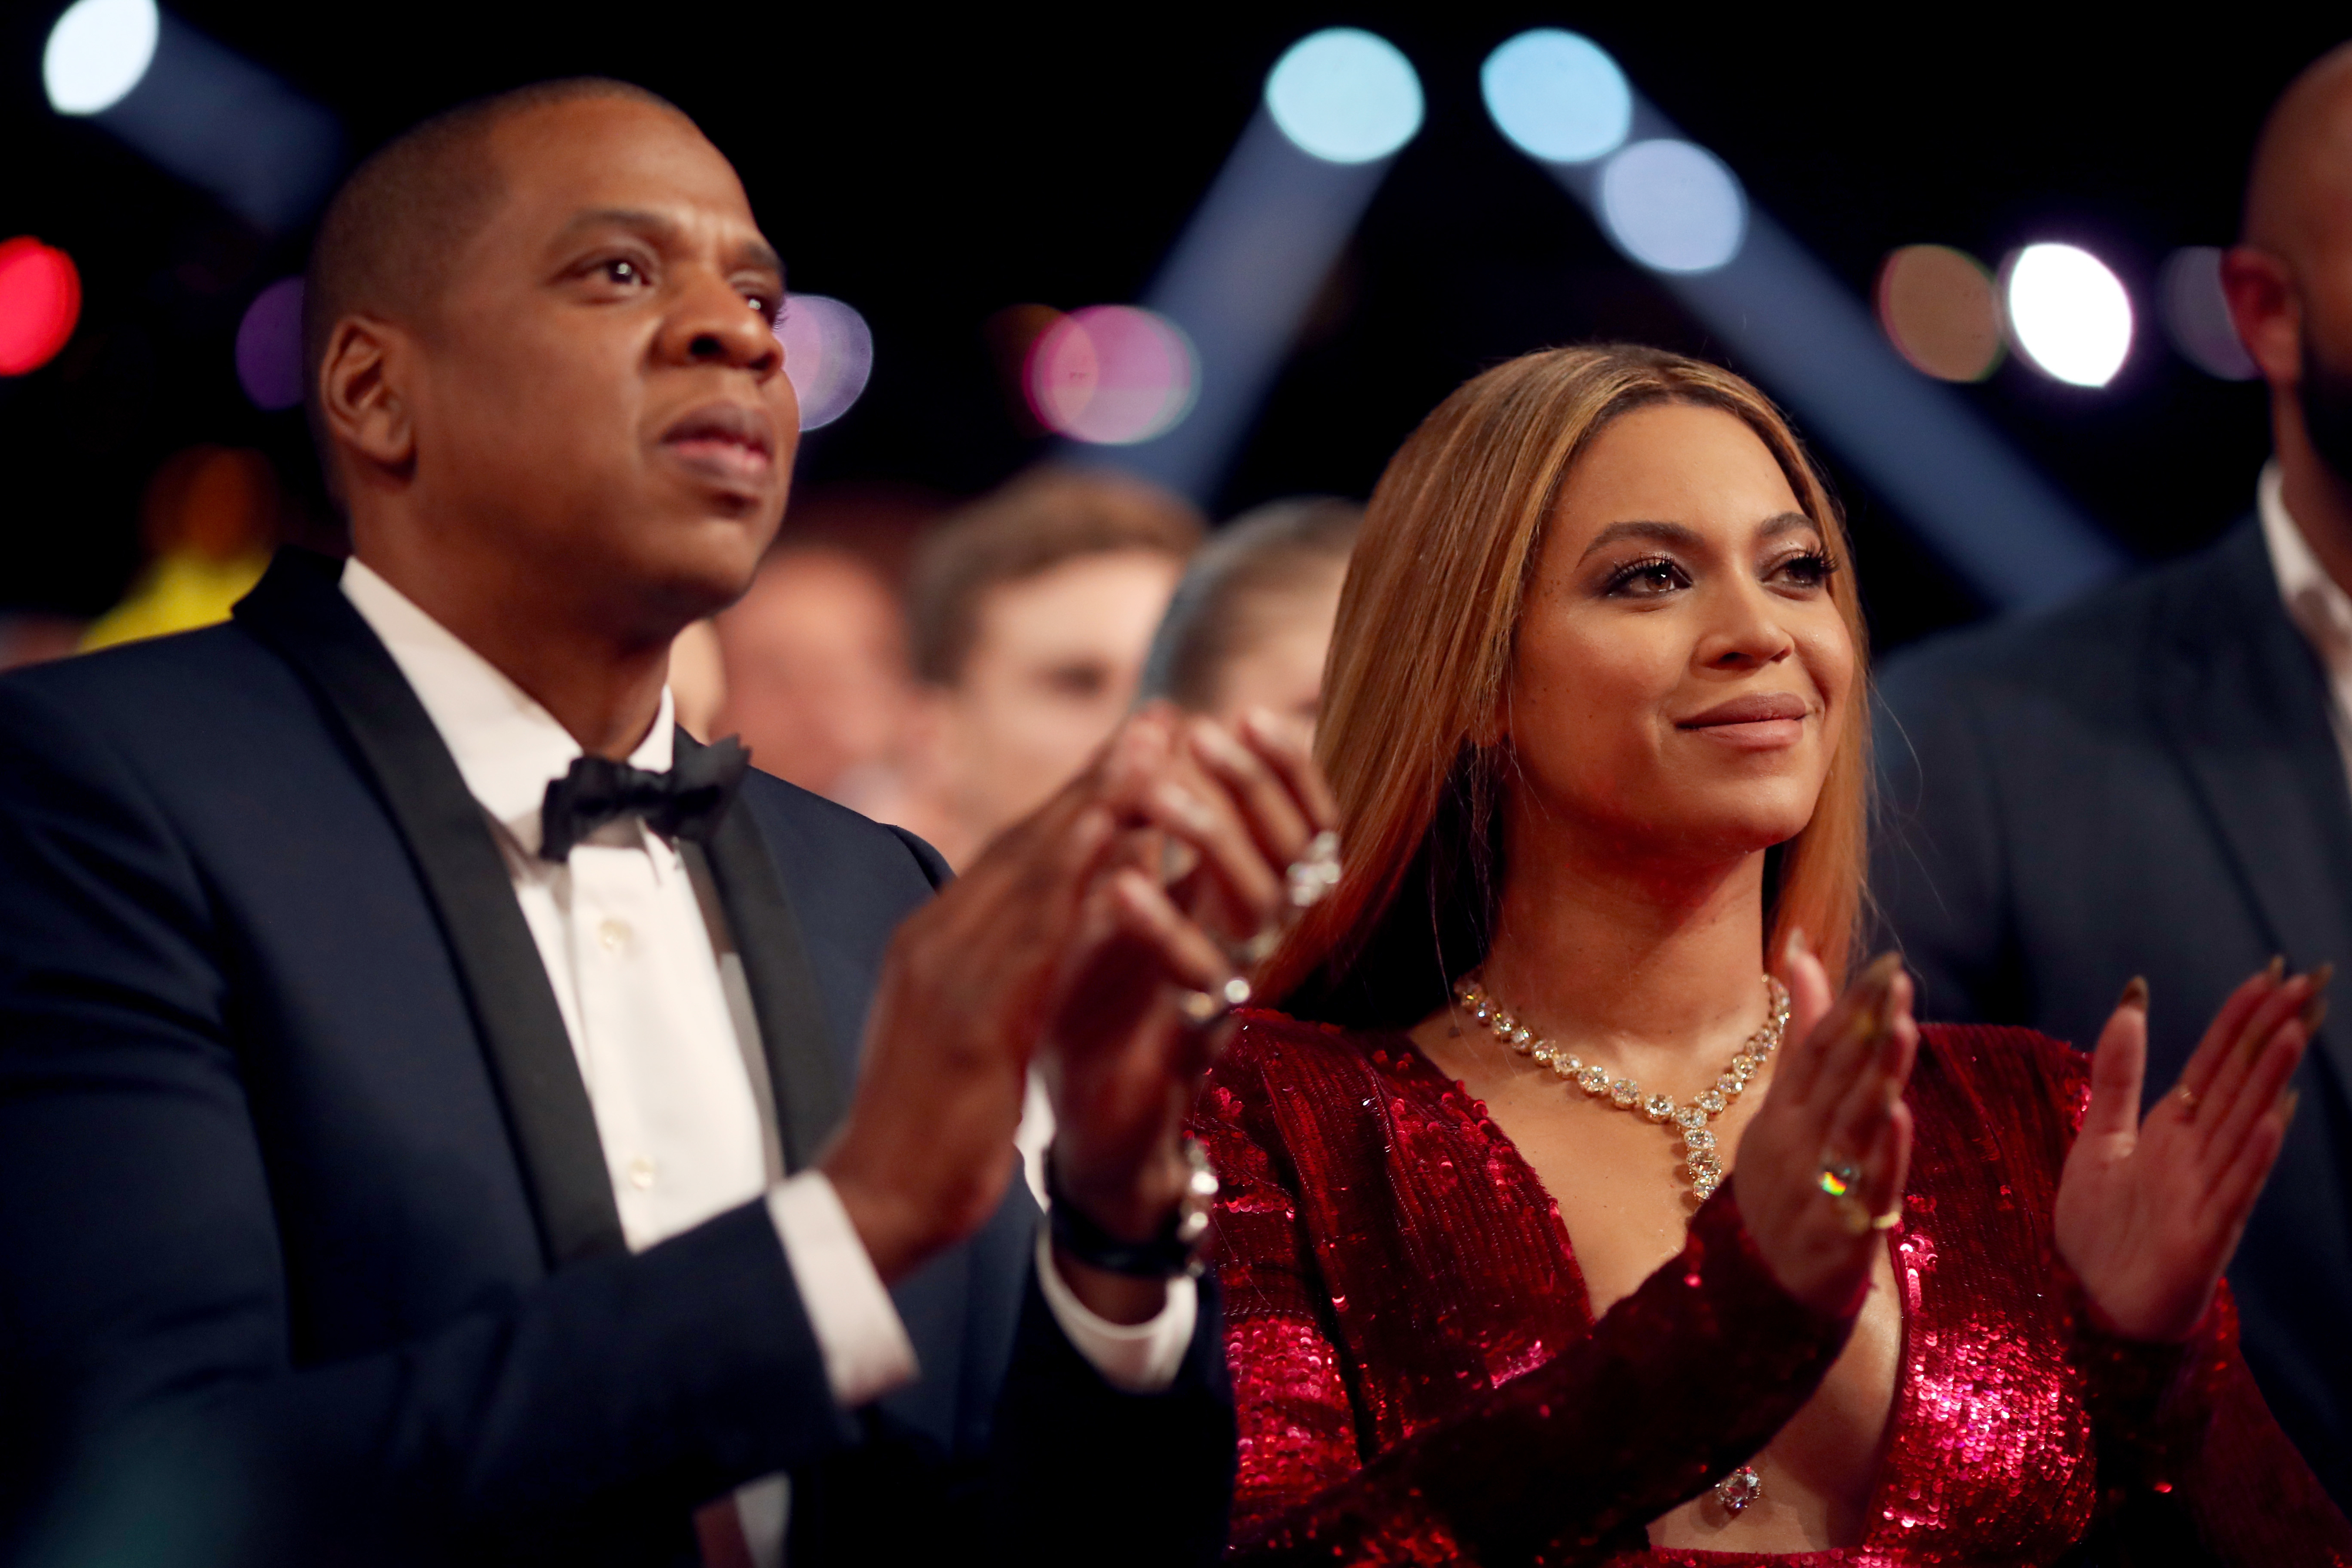 Beyoncé and jay z clapping at an event